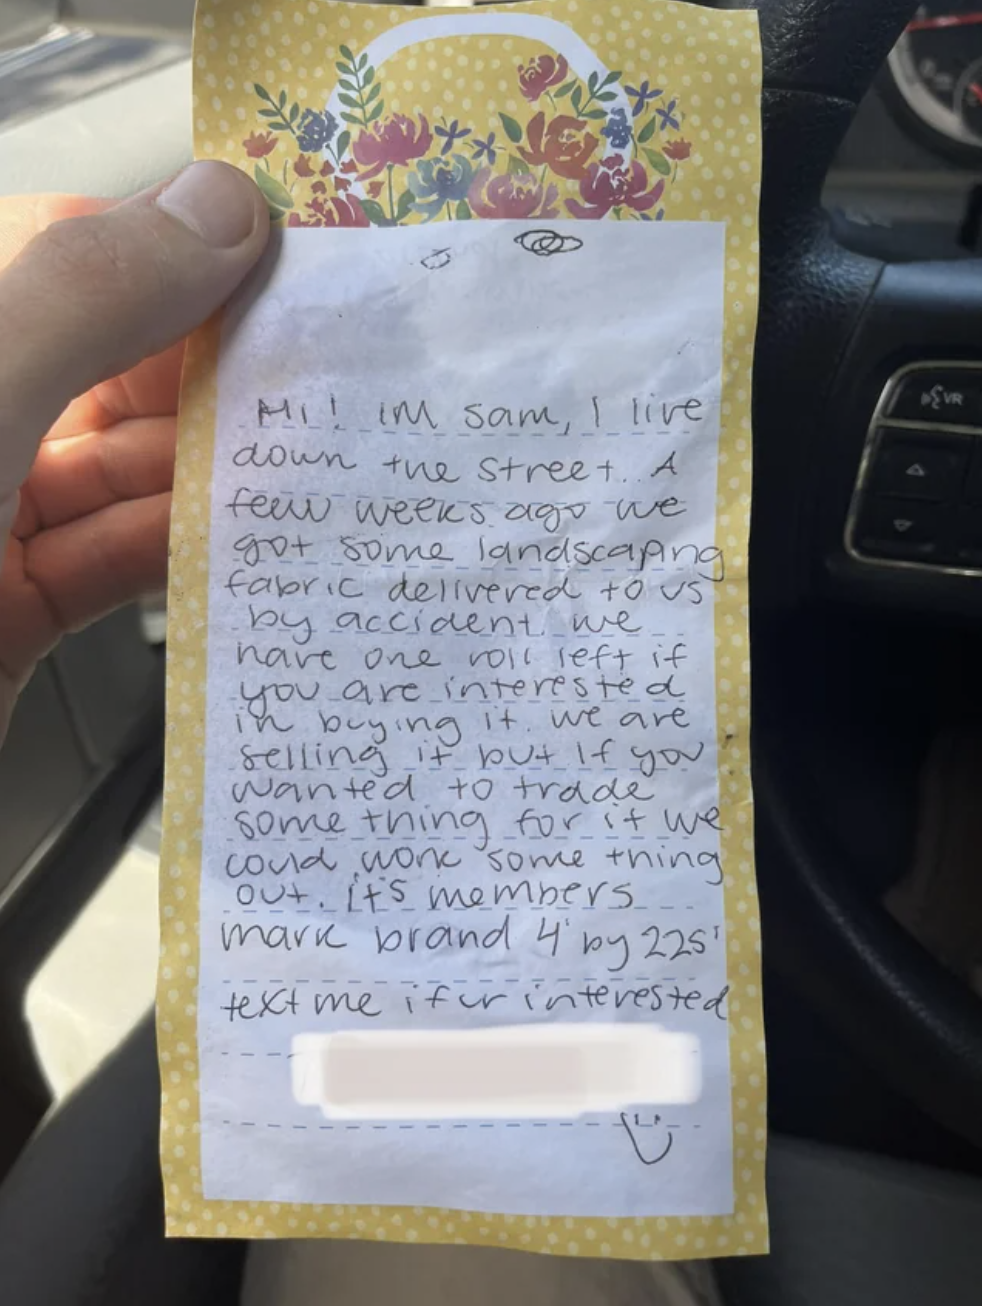 A note from a neighbor who stole the person&#x27;s package